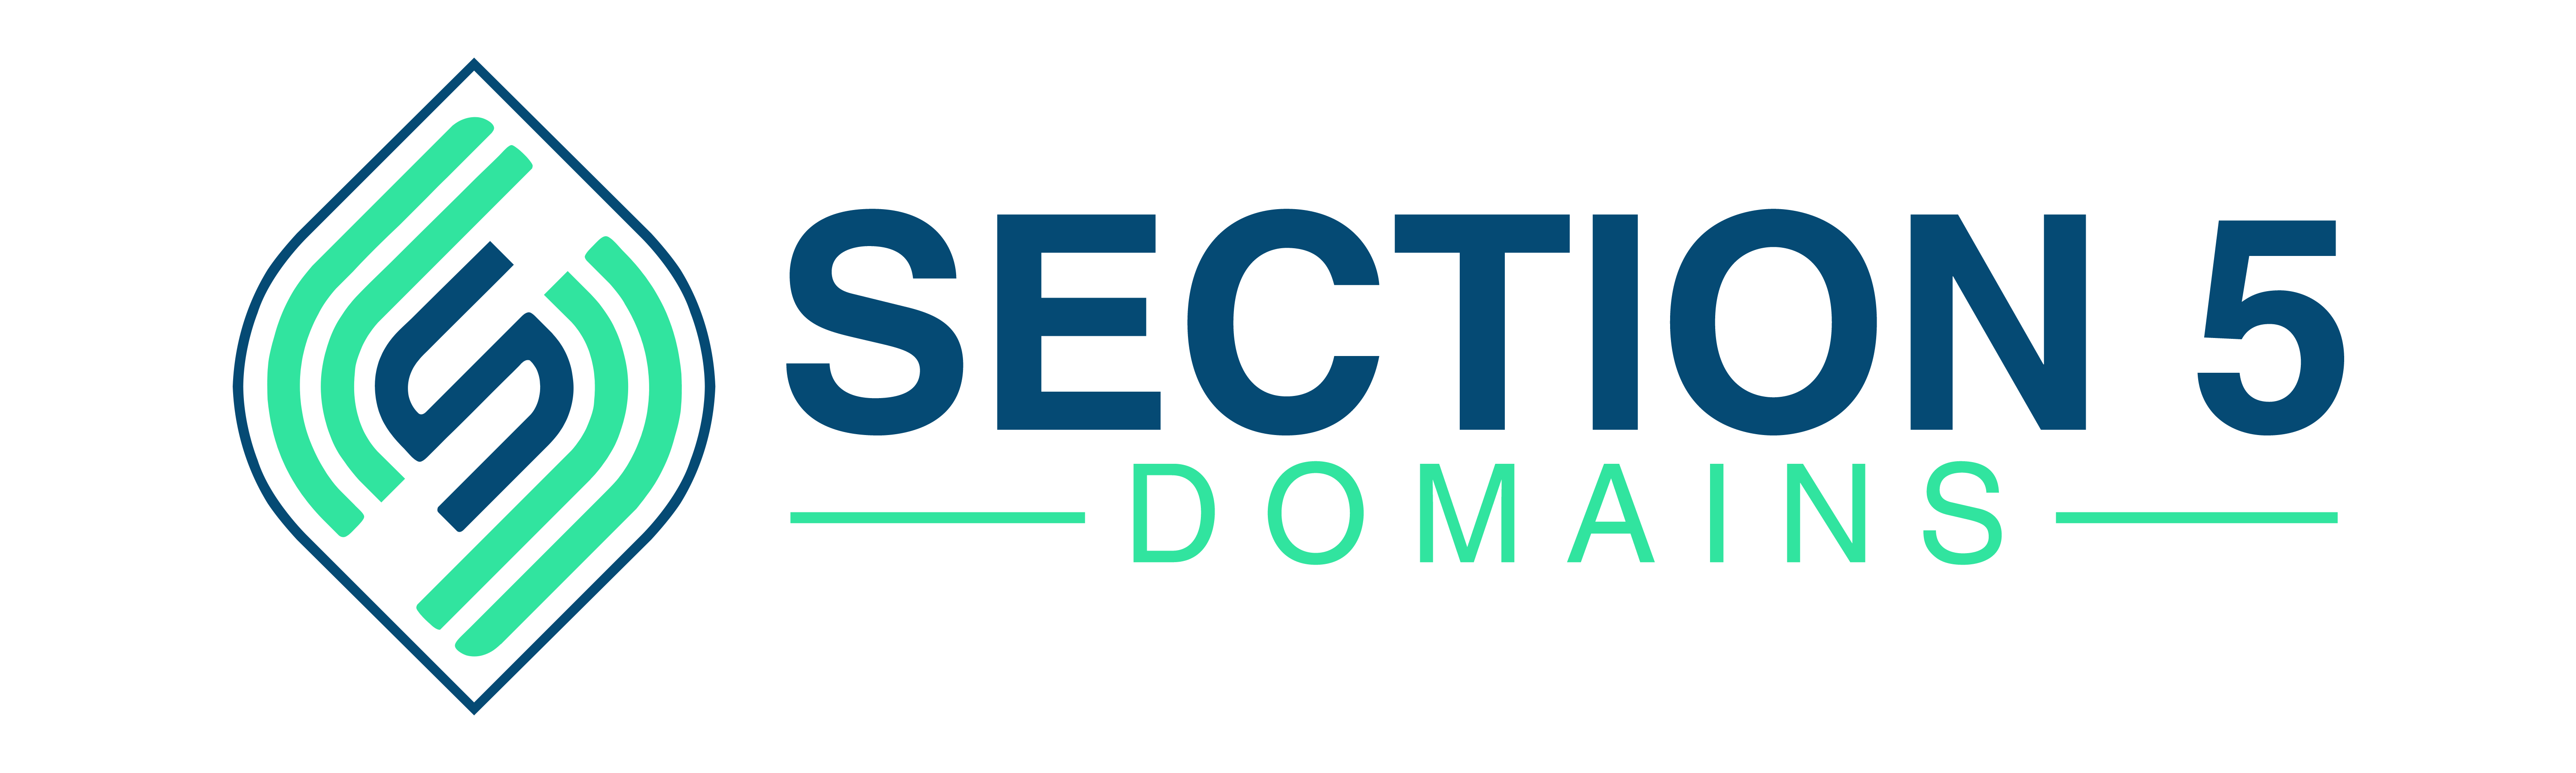 Section 5 Domains